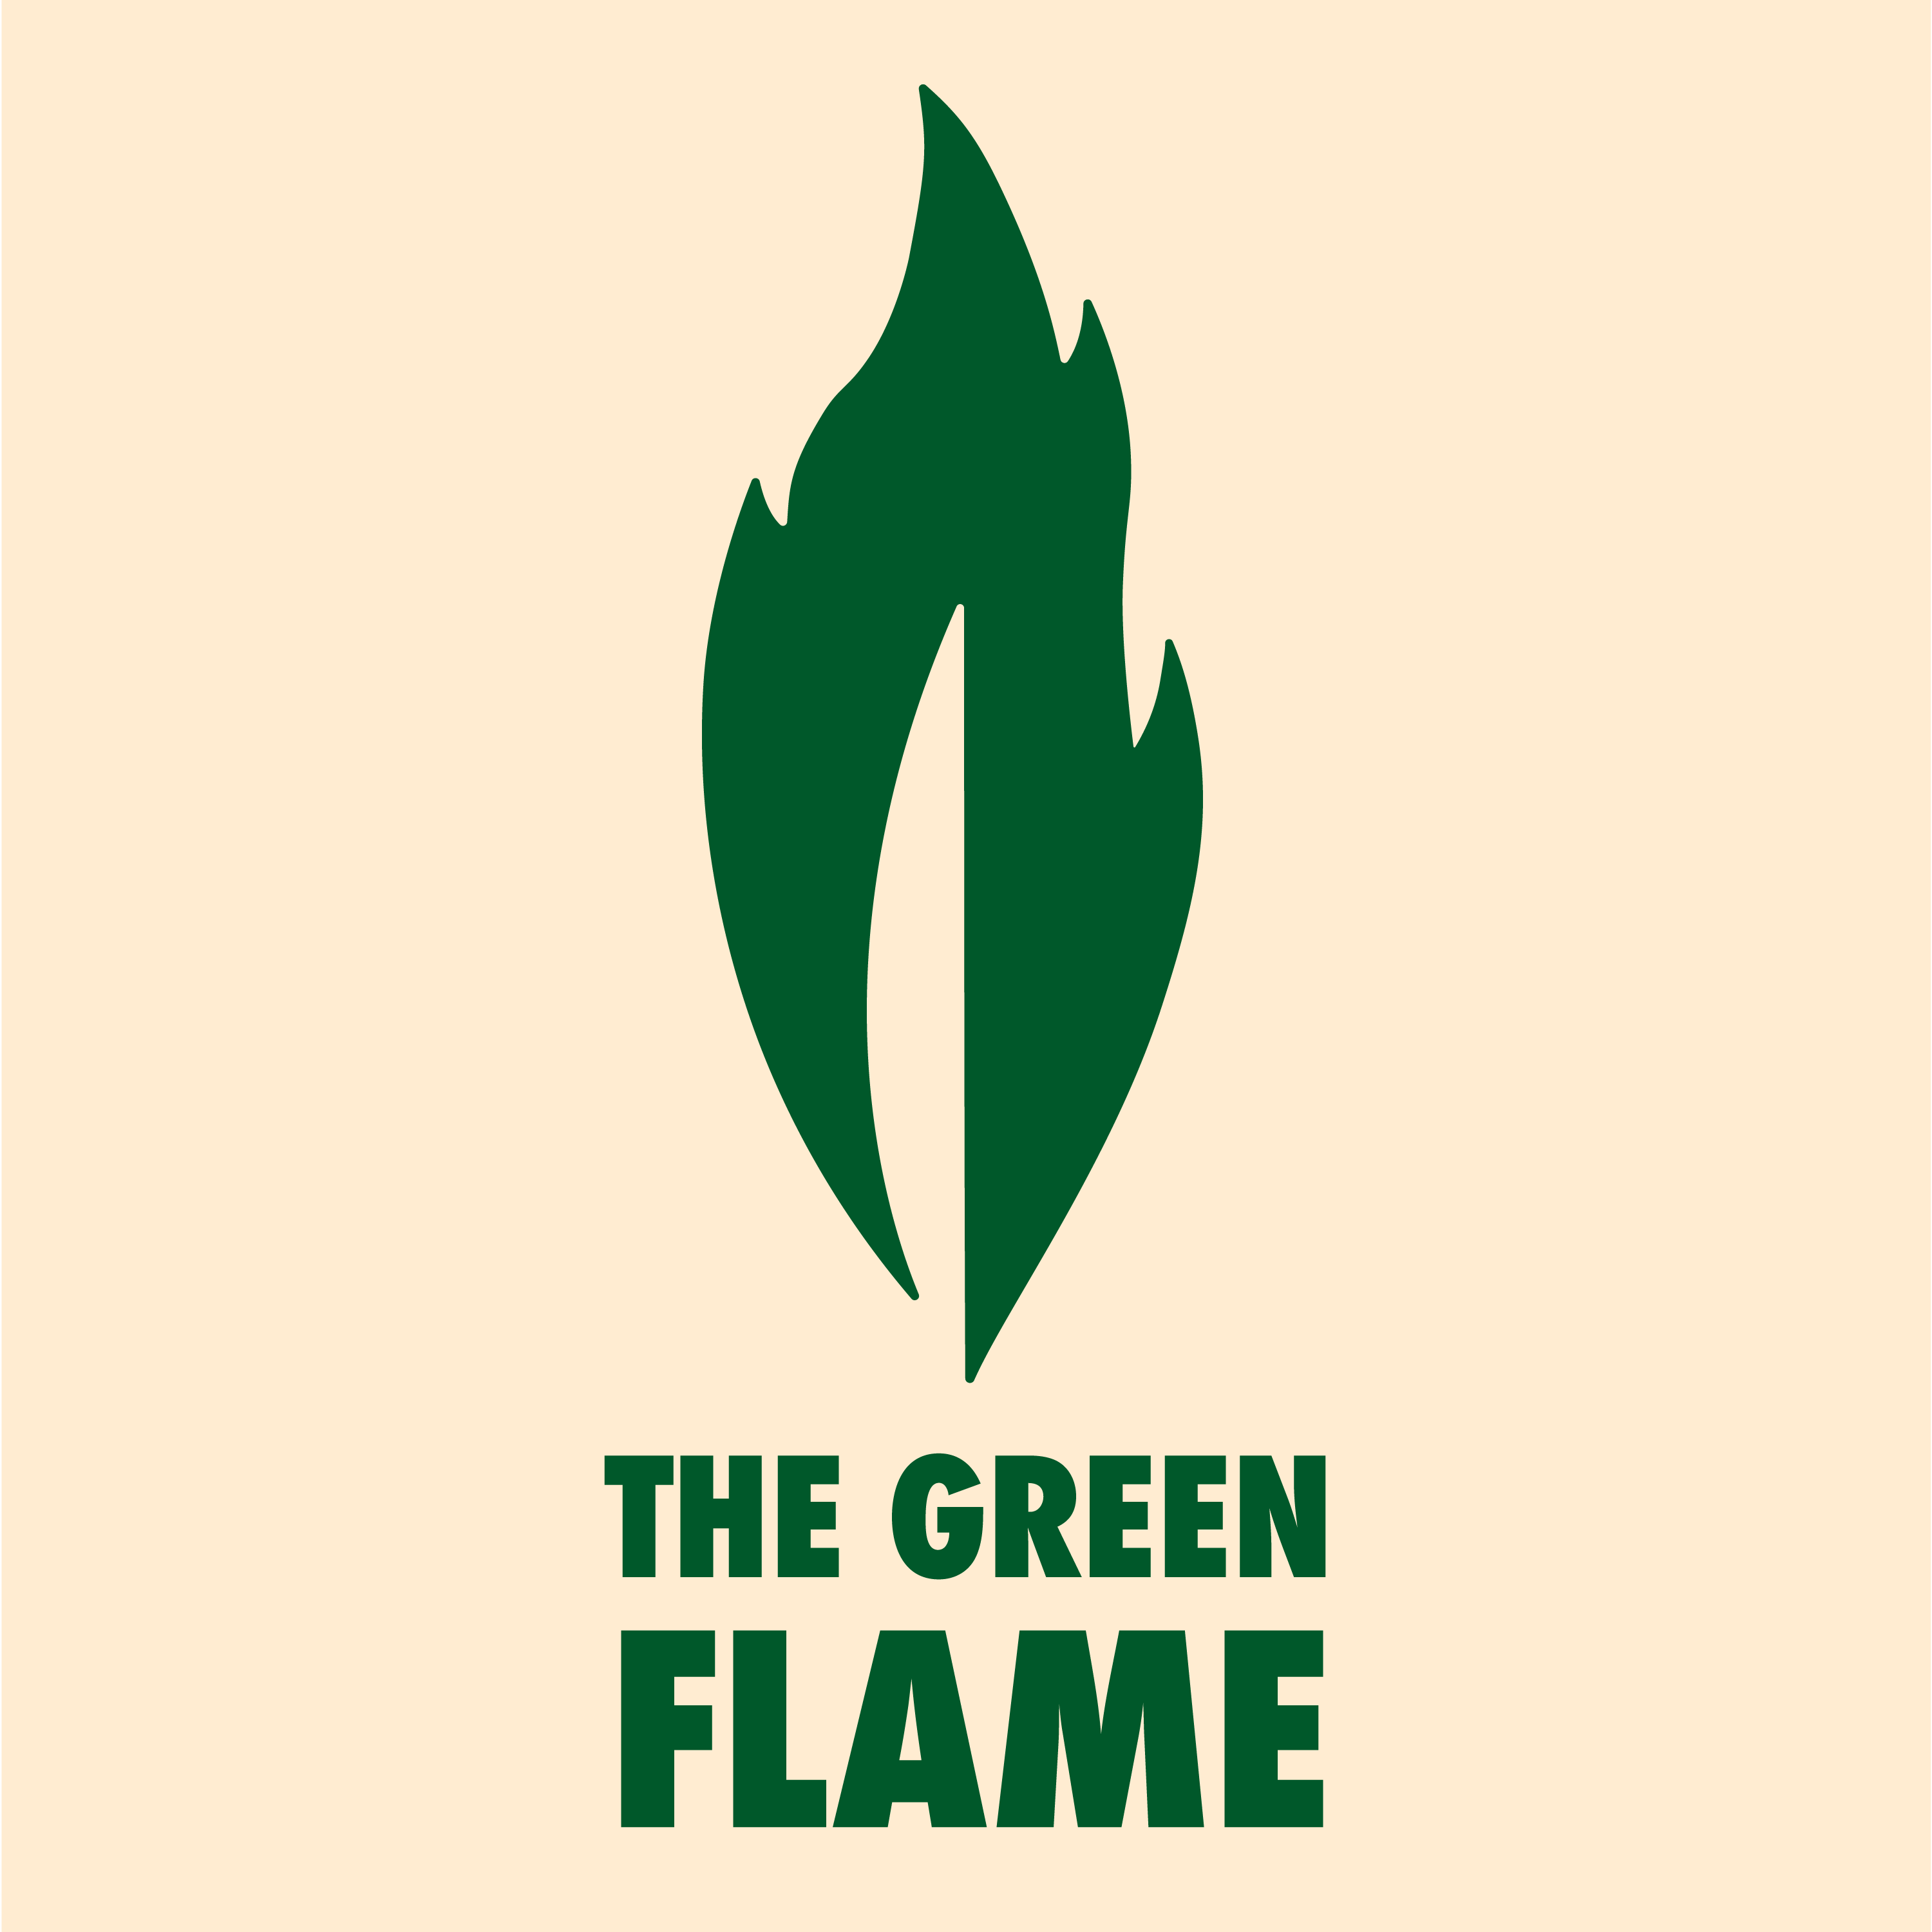 Conversation with Max Wilbert for his podcast The Green Flame